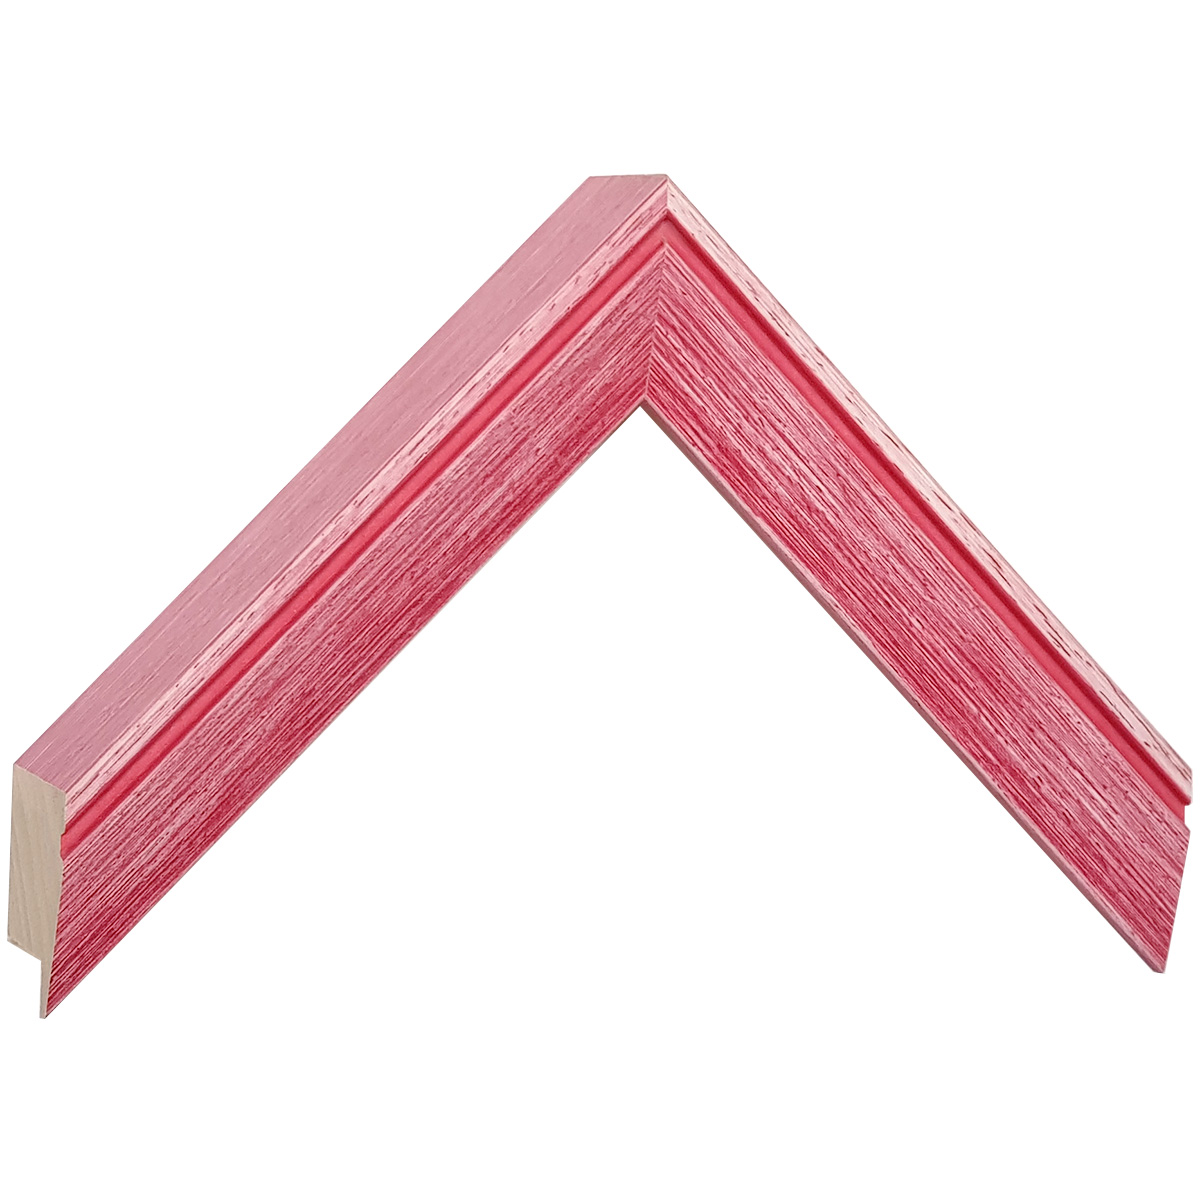 Moulding ayous, height 40mm width 28 - Pink - Sample